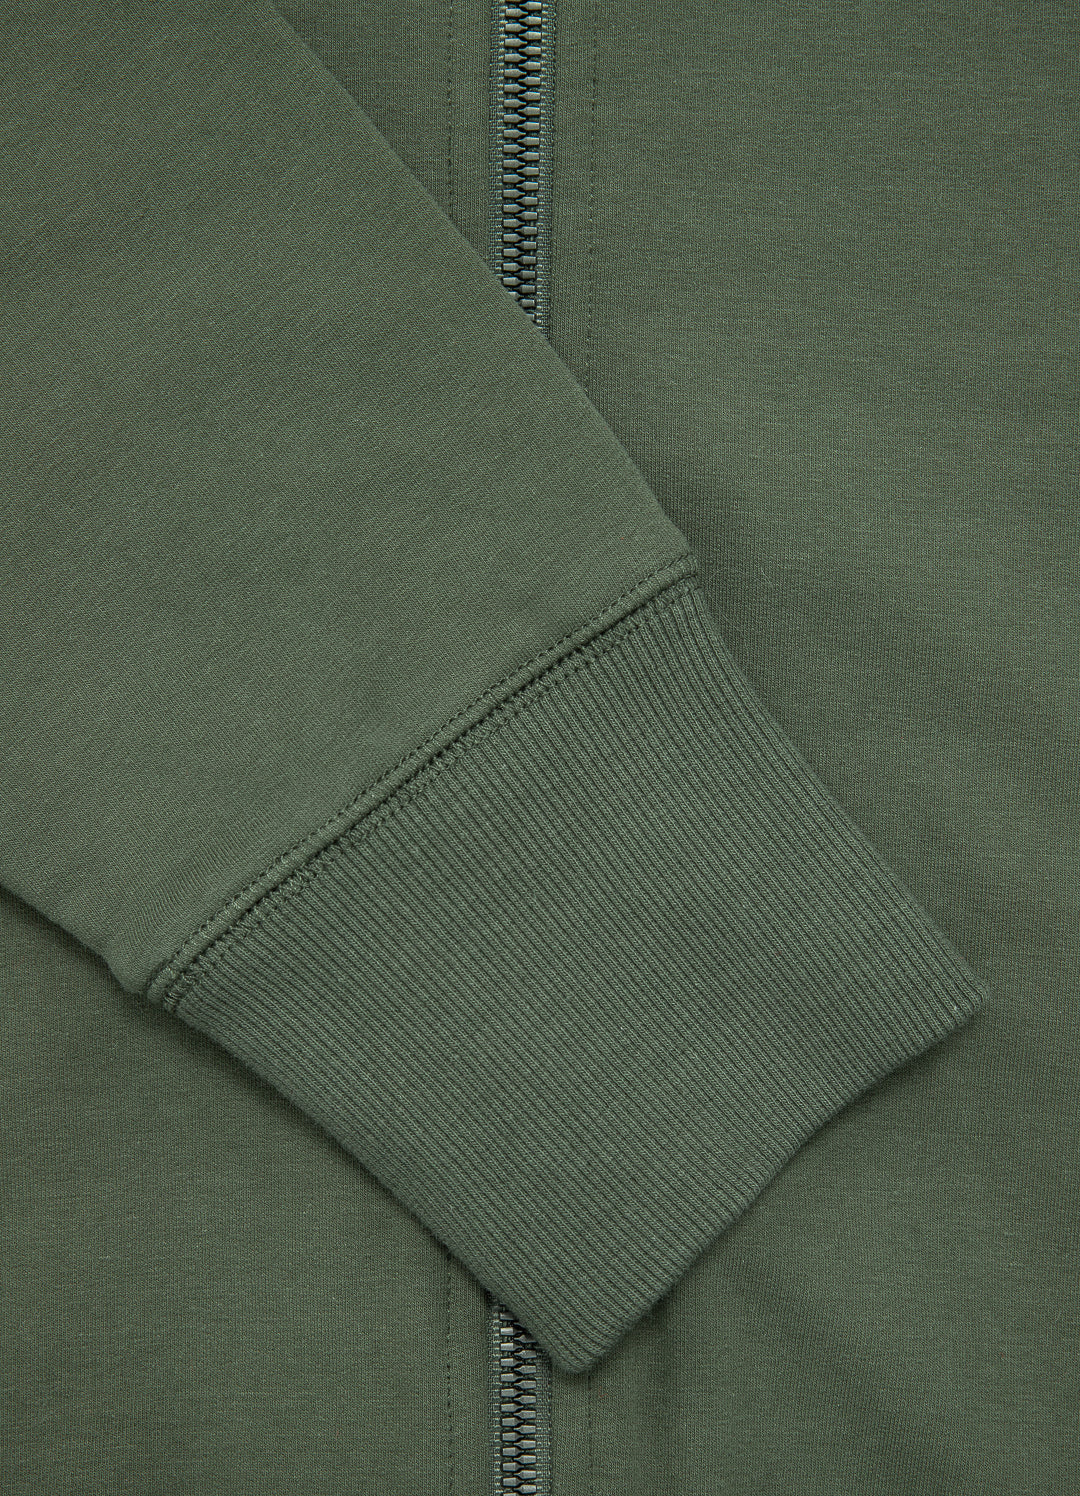 Sweatjacket French Terry VETTER Olive - Pitbull West Coast International Store 